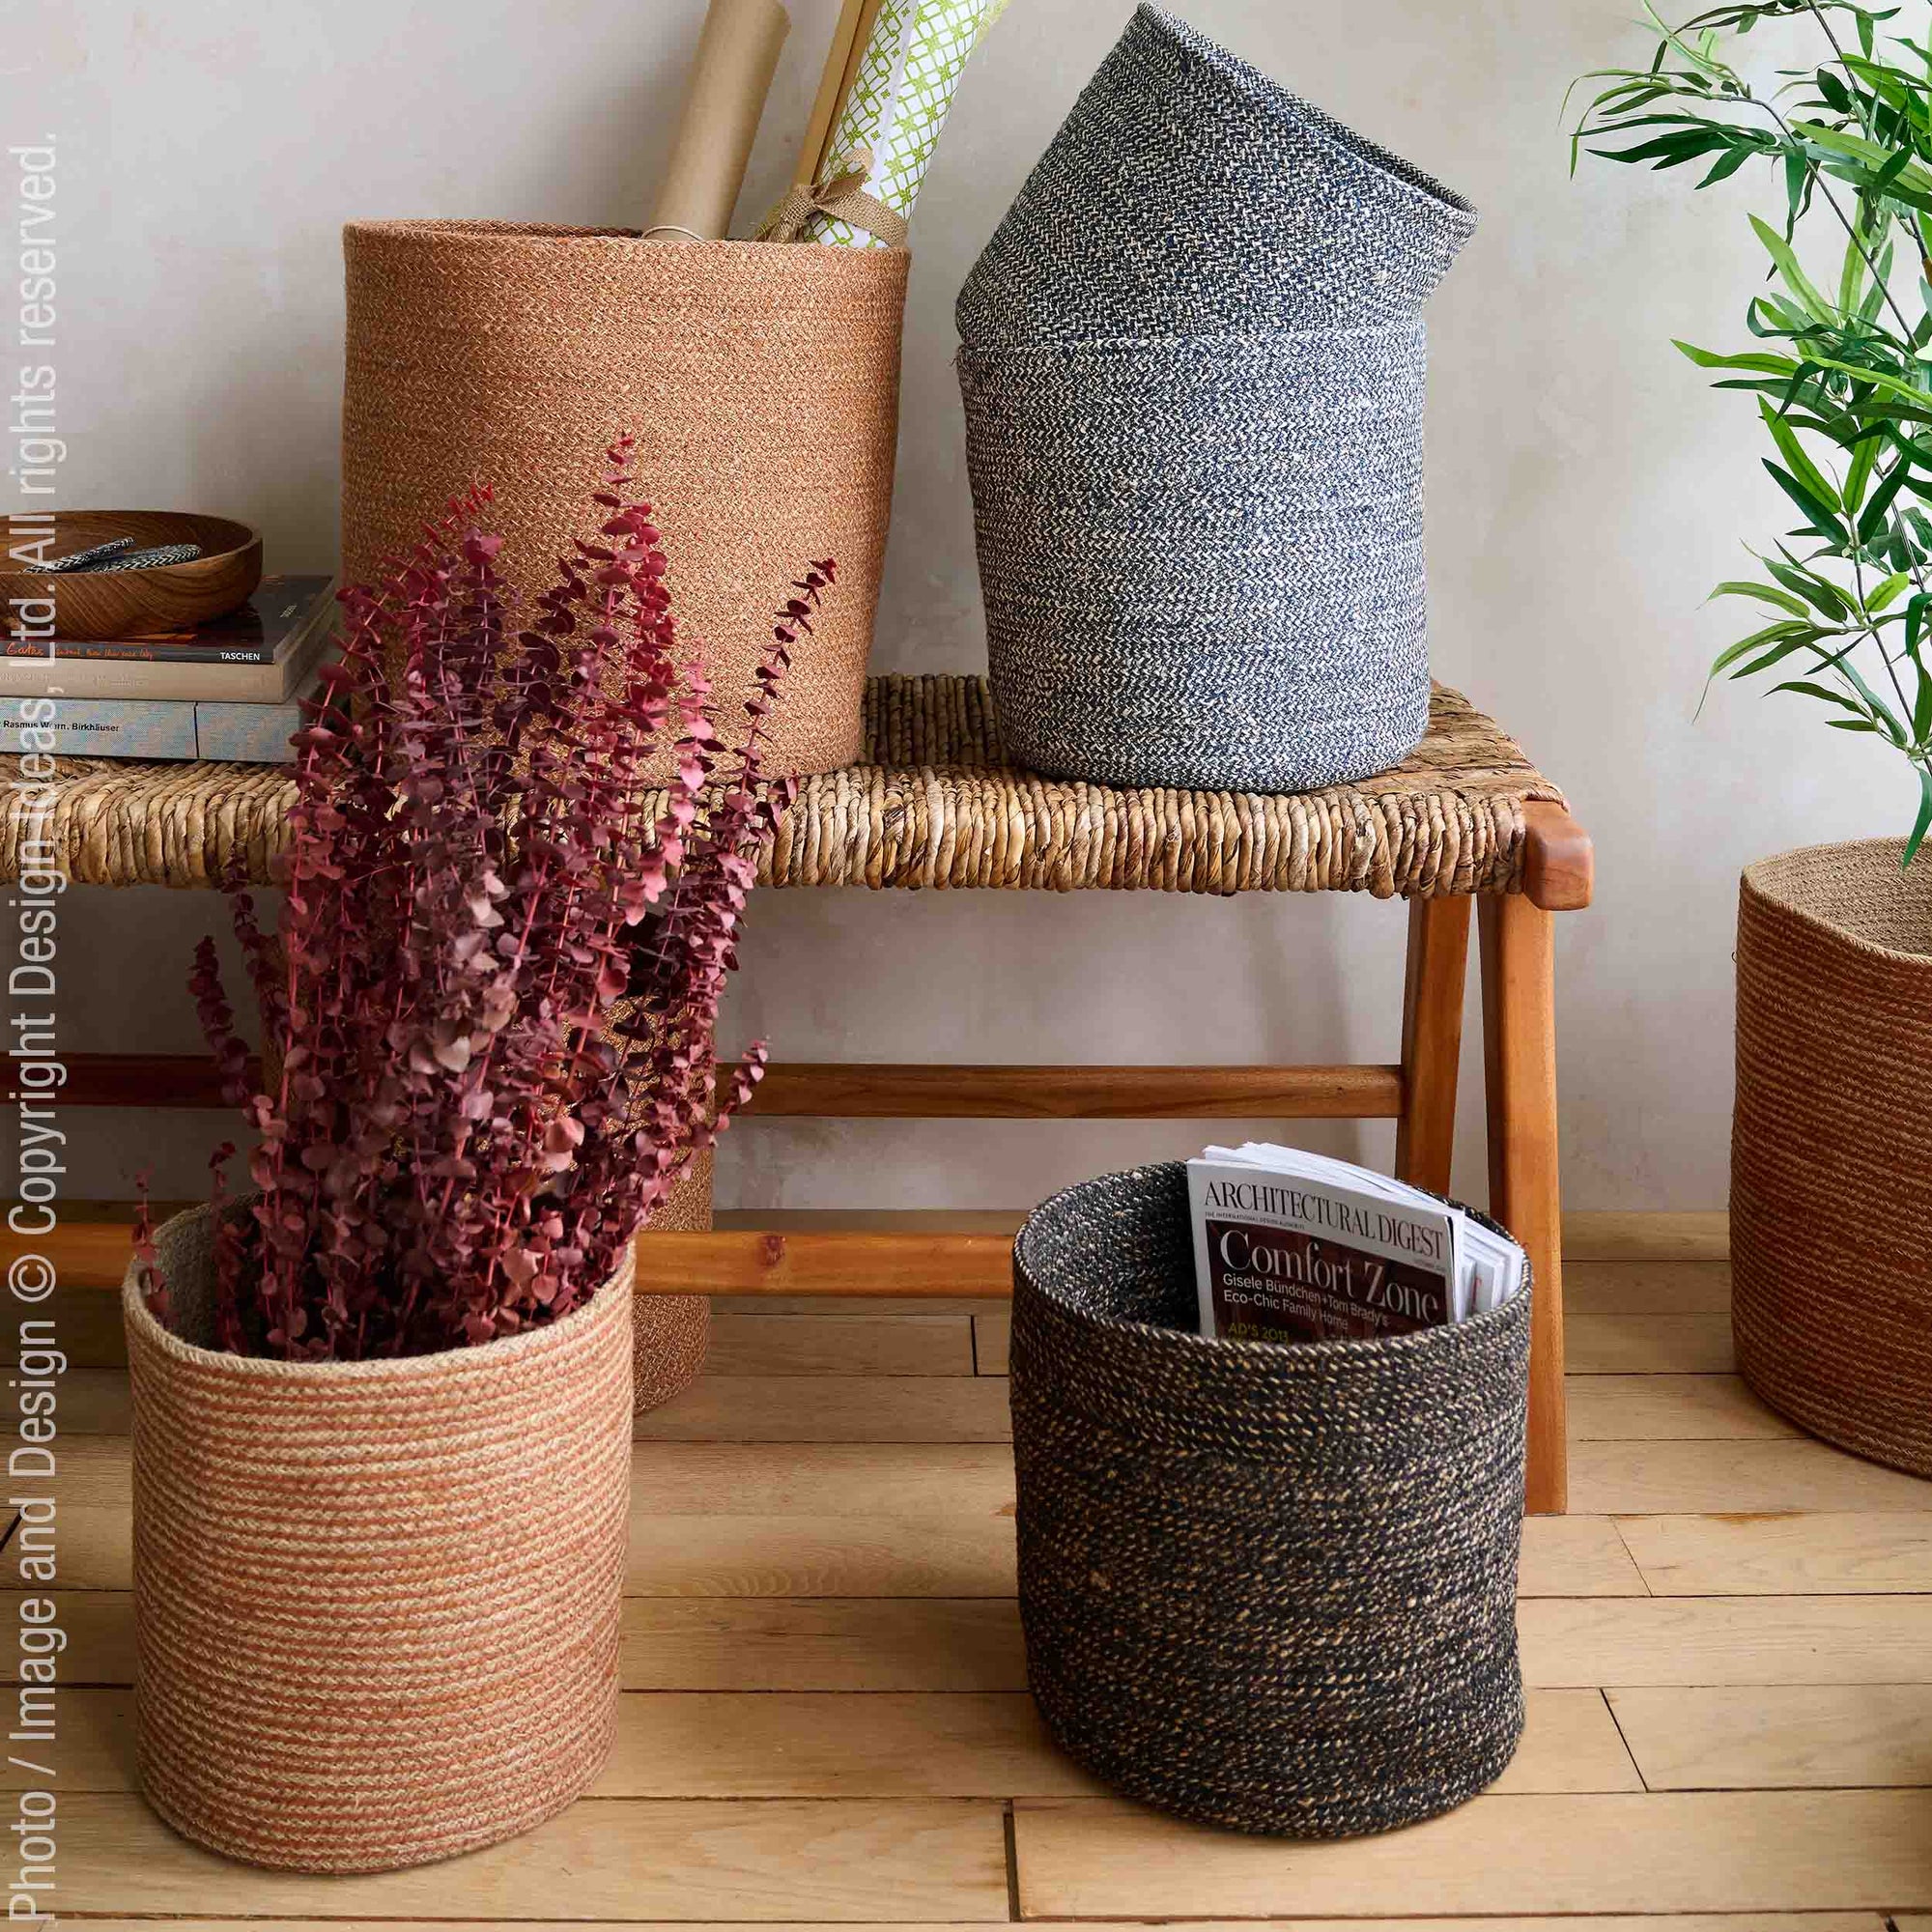 Melia™ baskets (set of 3) - Rust | Image 3 | Premium Basket from the Melia collection | made with Jute for long lasting use | texxture